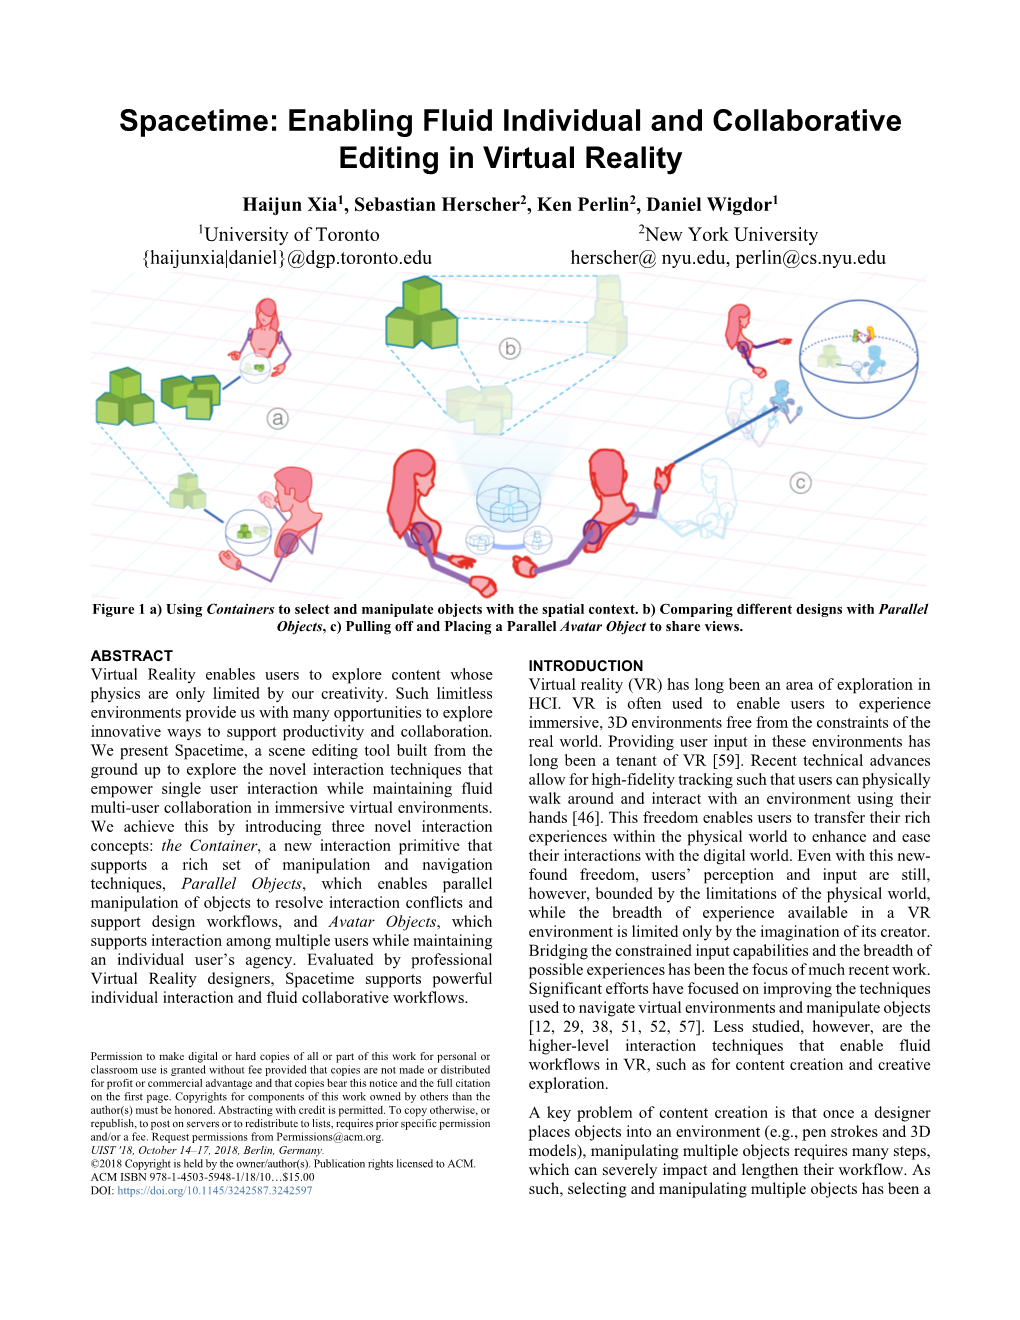 Enabling Fluid Individual and Collaborative Editing in Virtual Reality